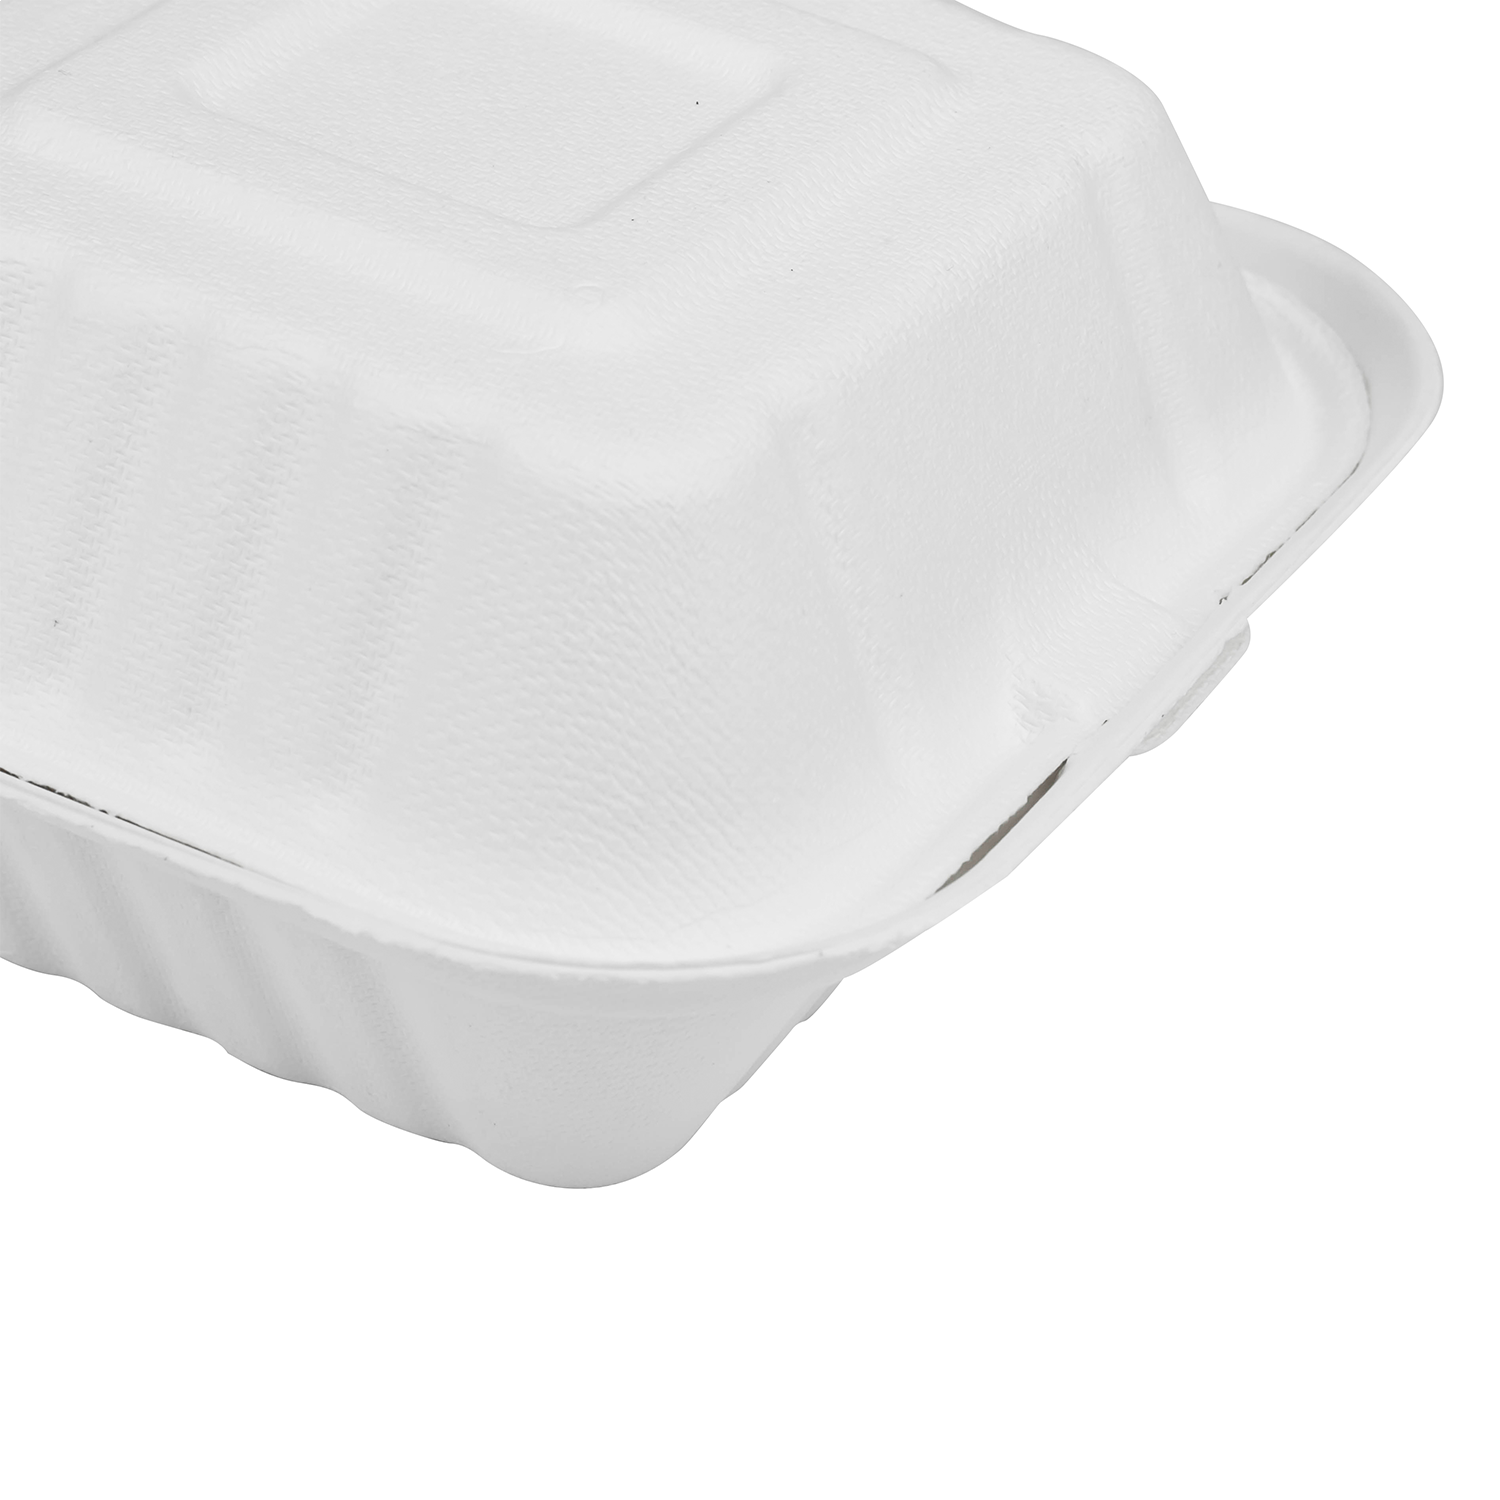 [100 Pack] Compostable Take Out Food Containers 6x6 To Go Boxes by Avant  Grub